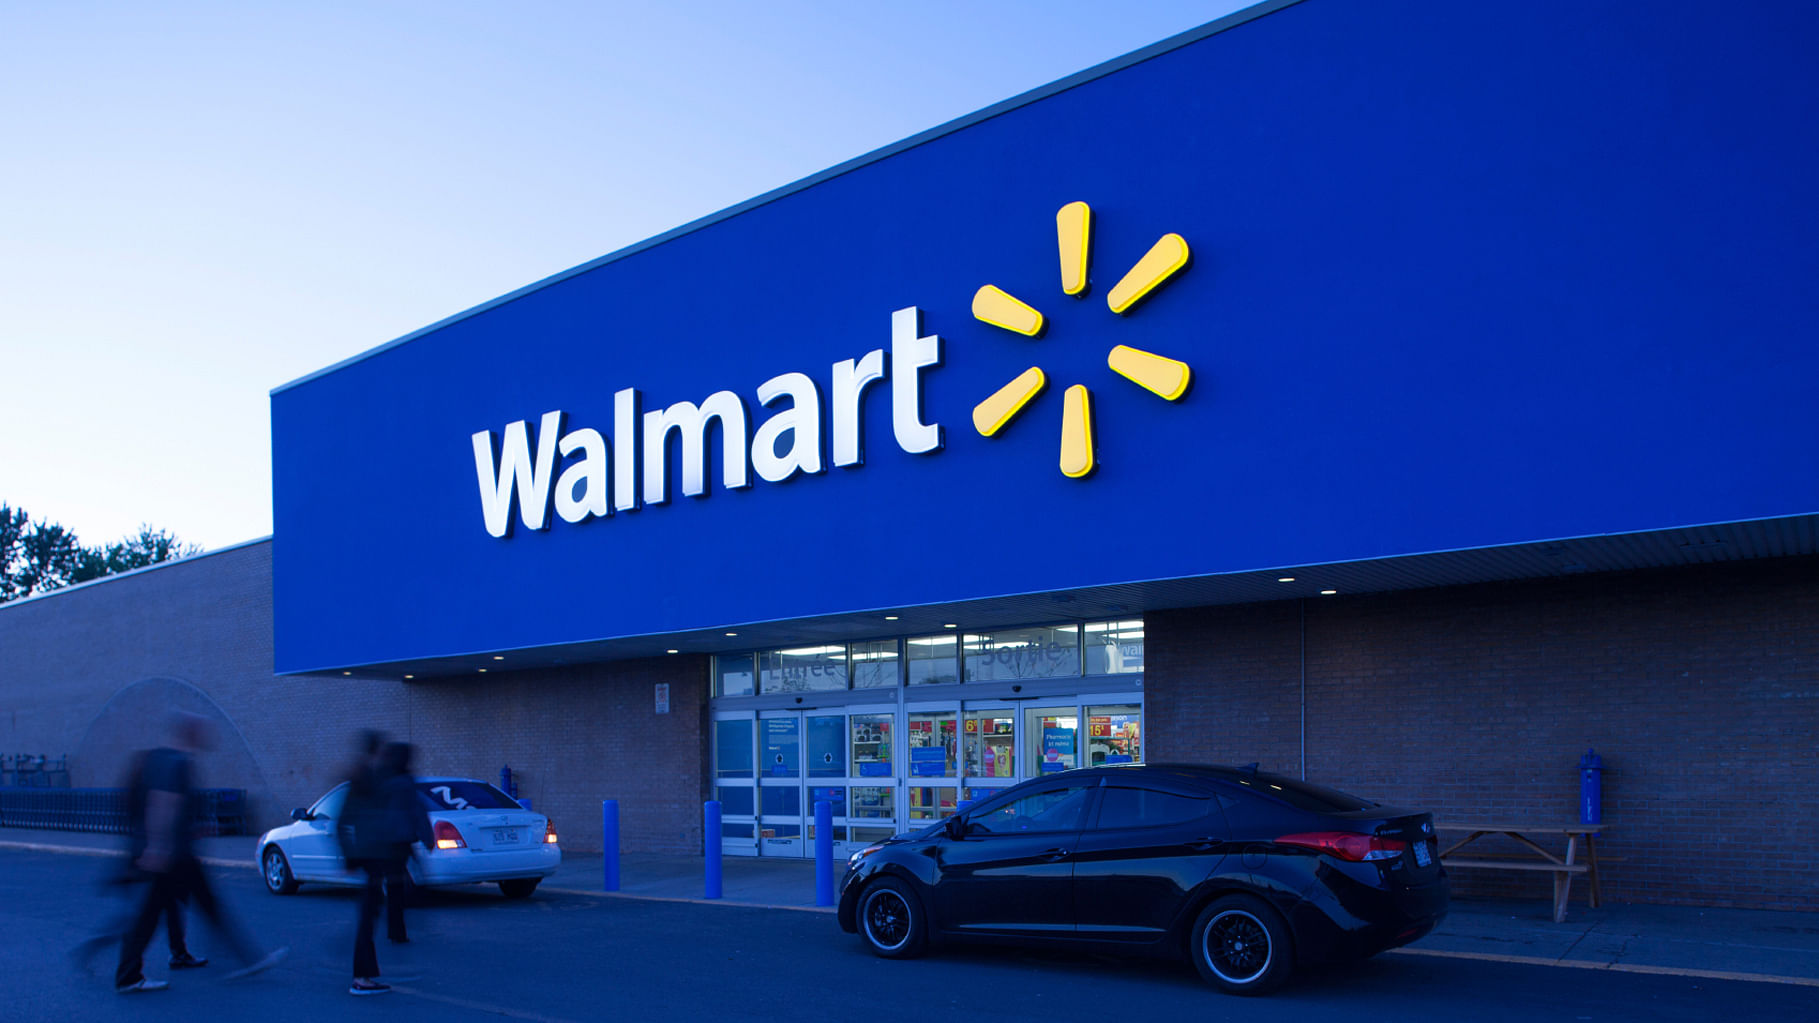 Swadeshi Jagran Manch (SJM) alleged that Walmart was “circumventing” rules for a “back-door entry” into India